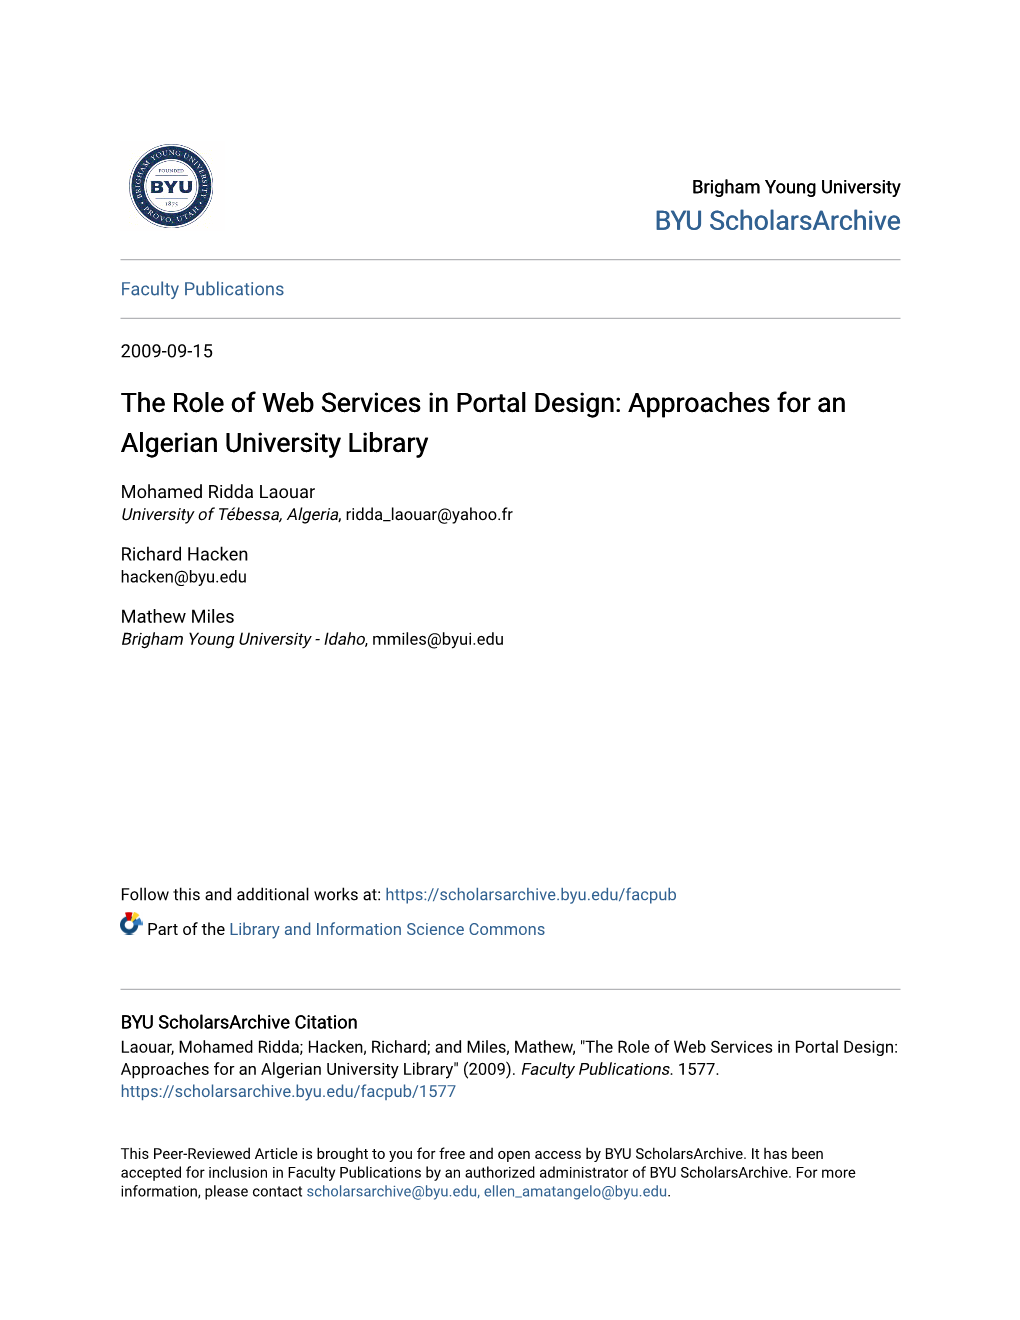 The Role of Web Services in Portal Design: Approaches for an Algerian University Library